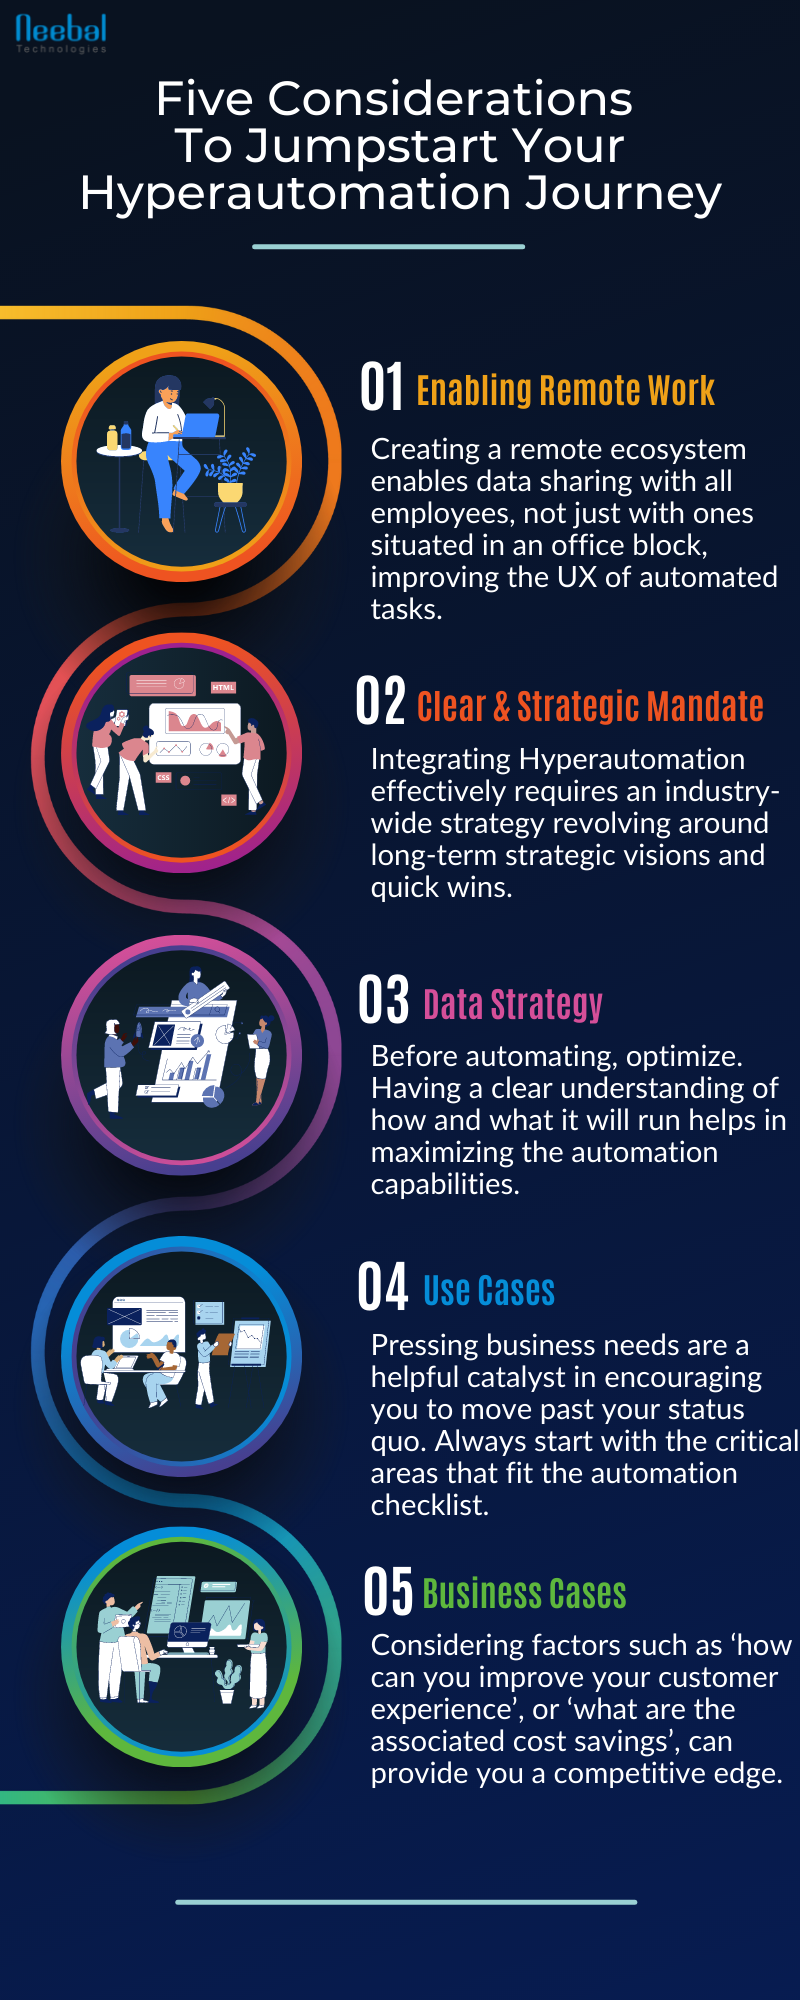 5 considerations to jumpstart your Hyperautomation journey (2)